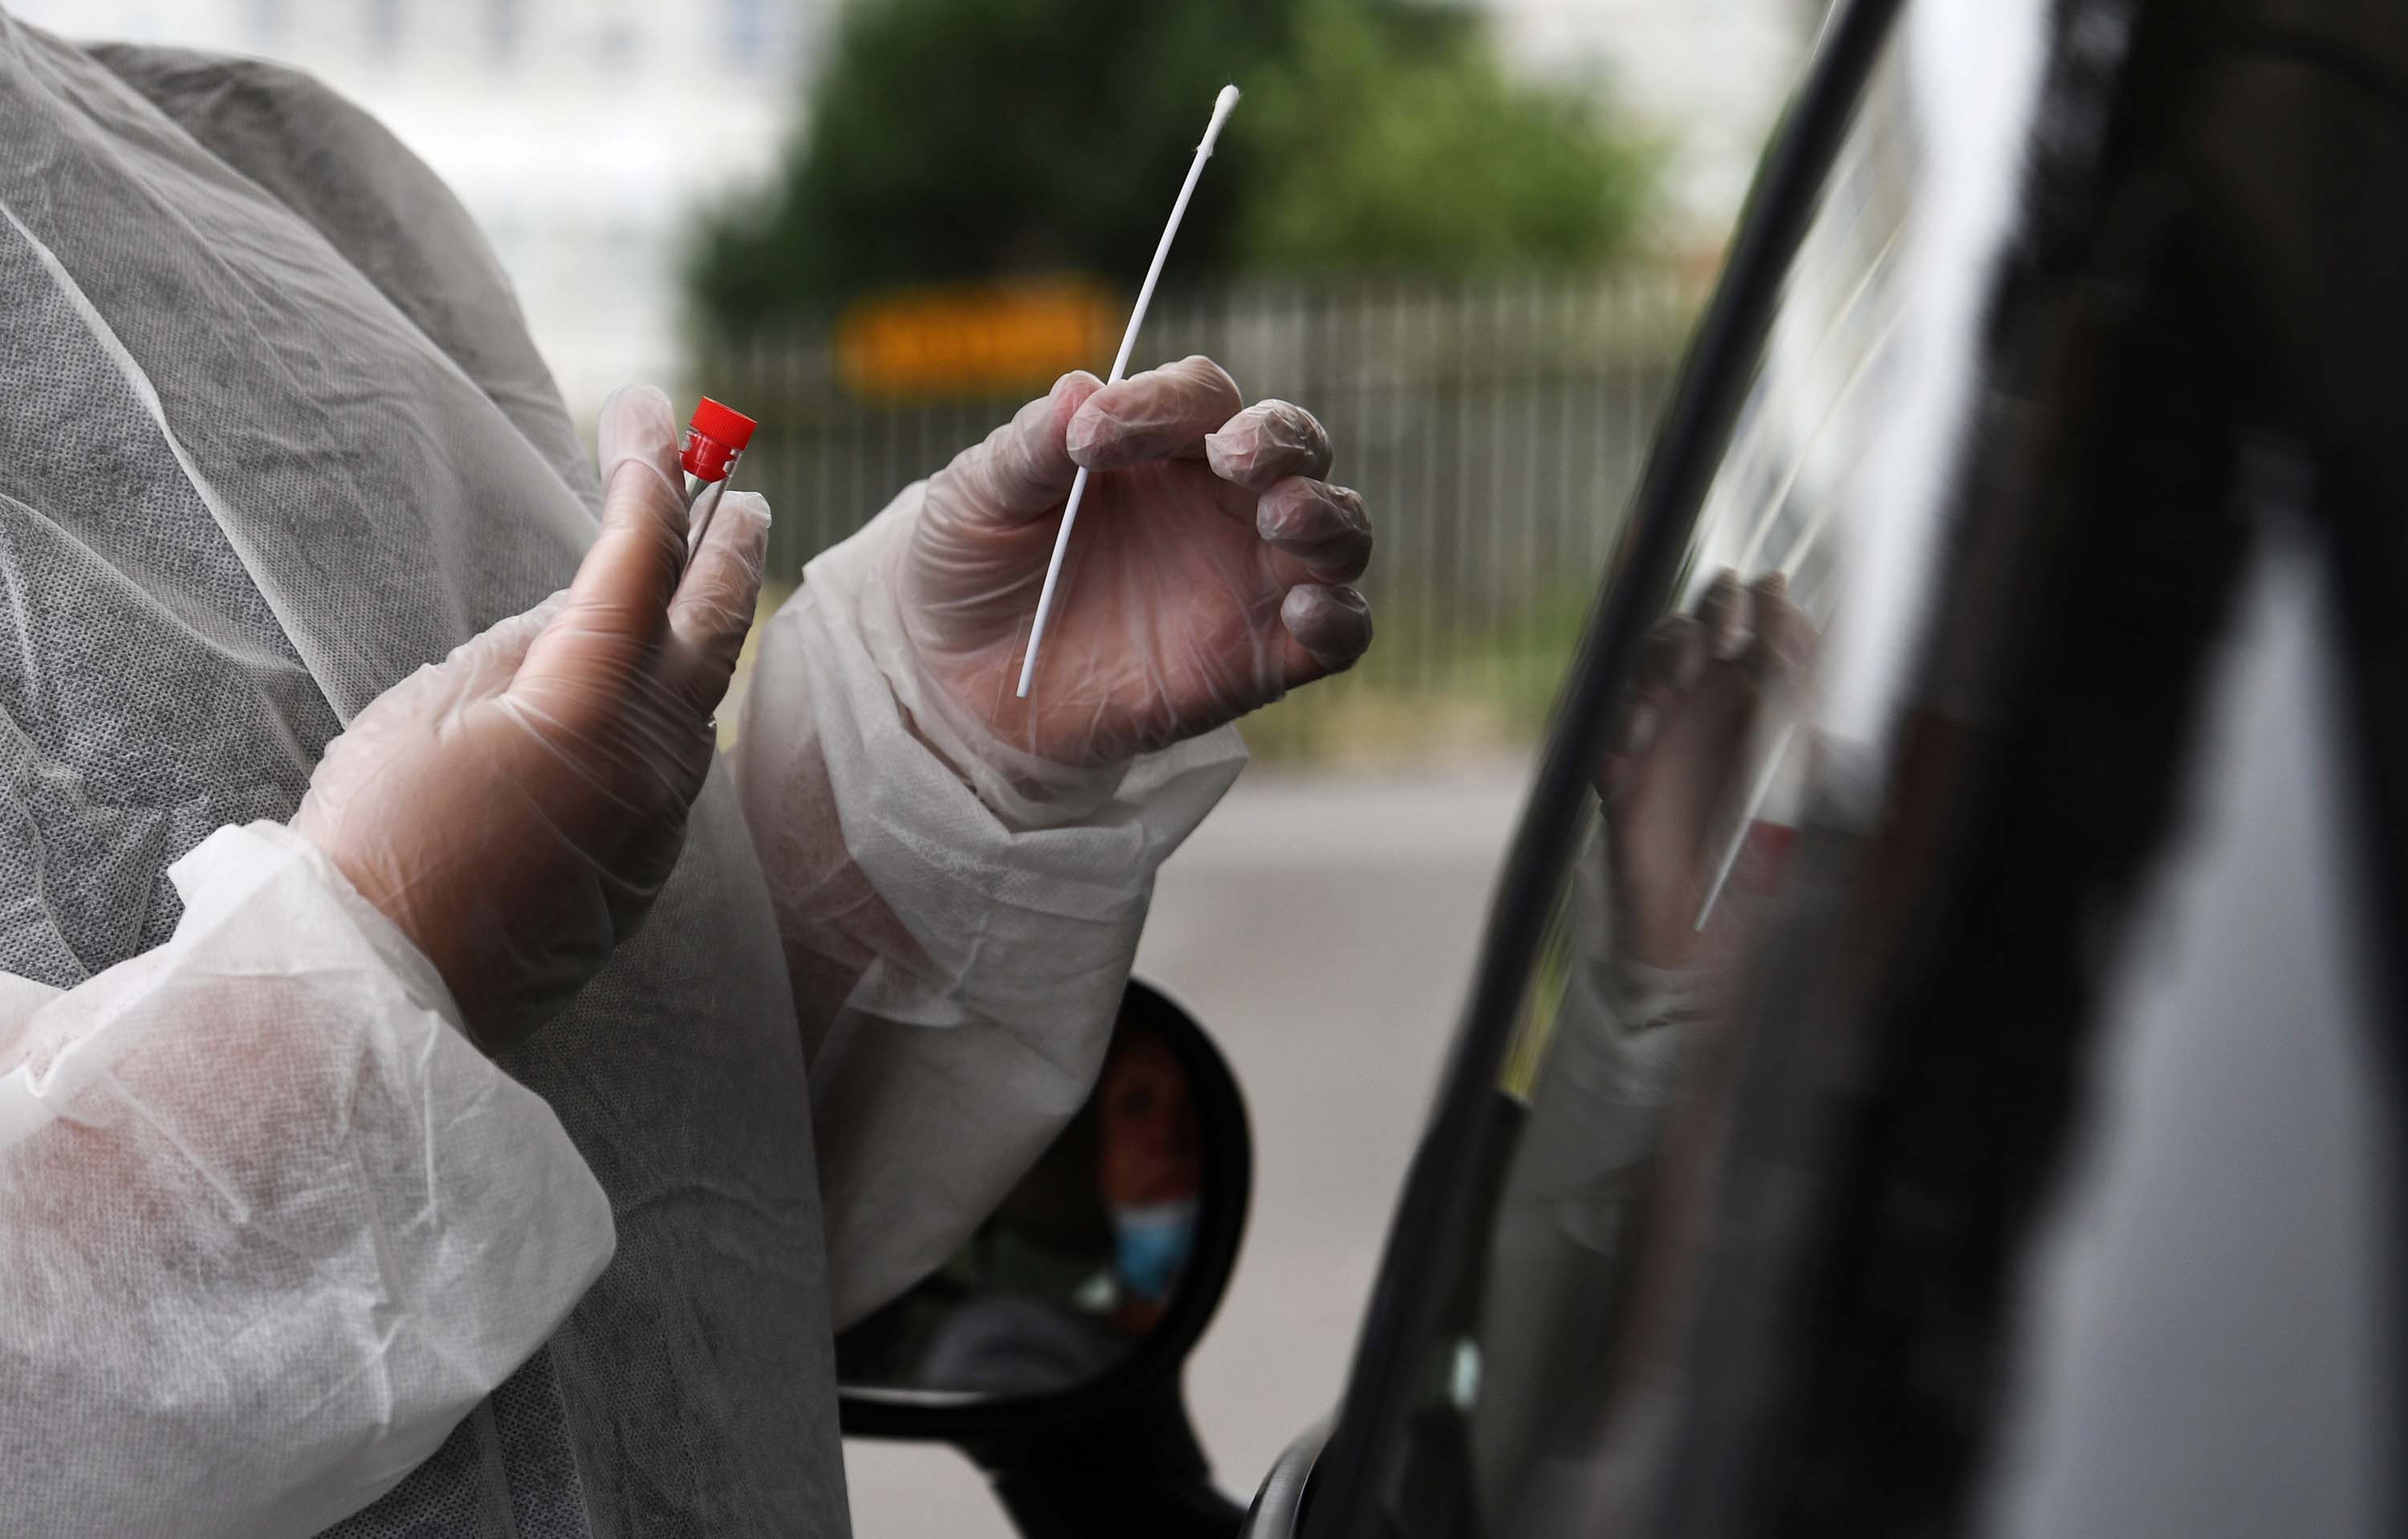 A medical worker collects a sample from a person at a Covid-19 drive-in testing center in Brest, France, on July 31.